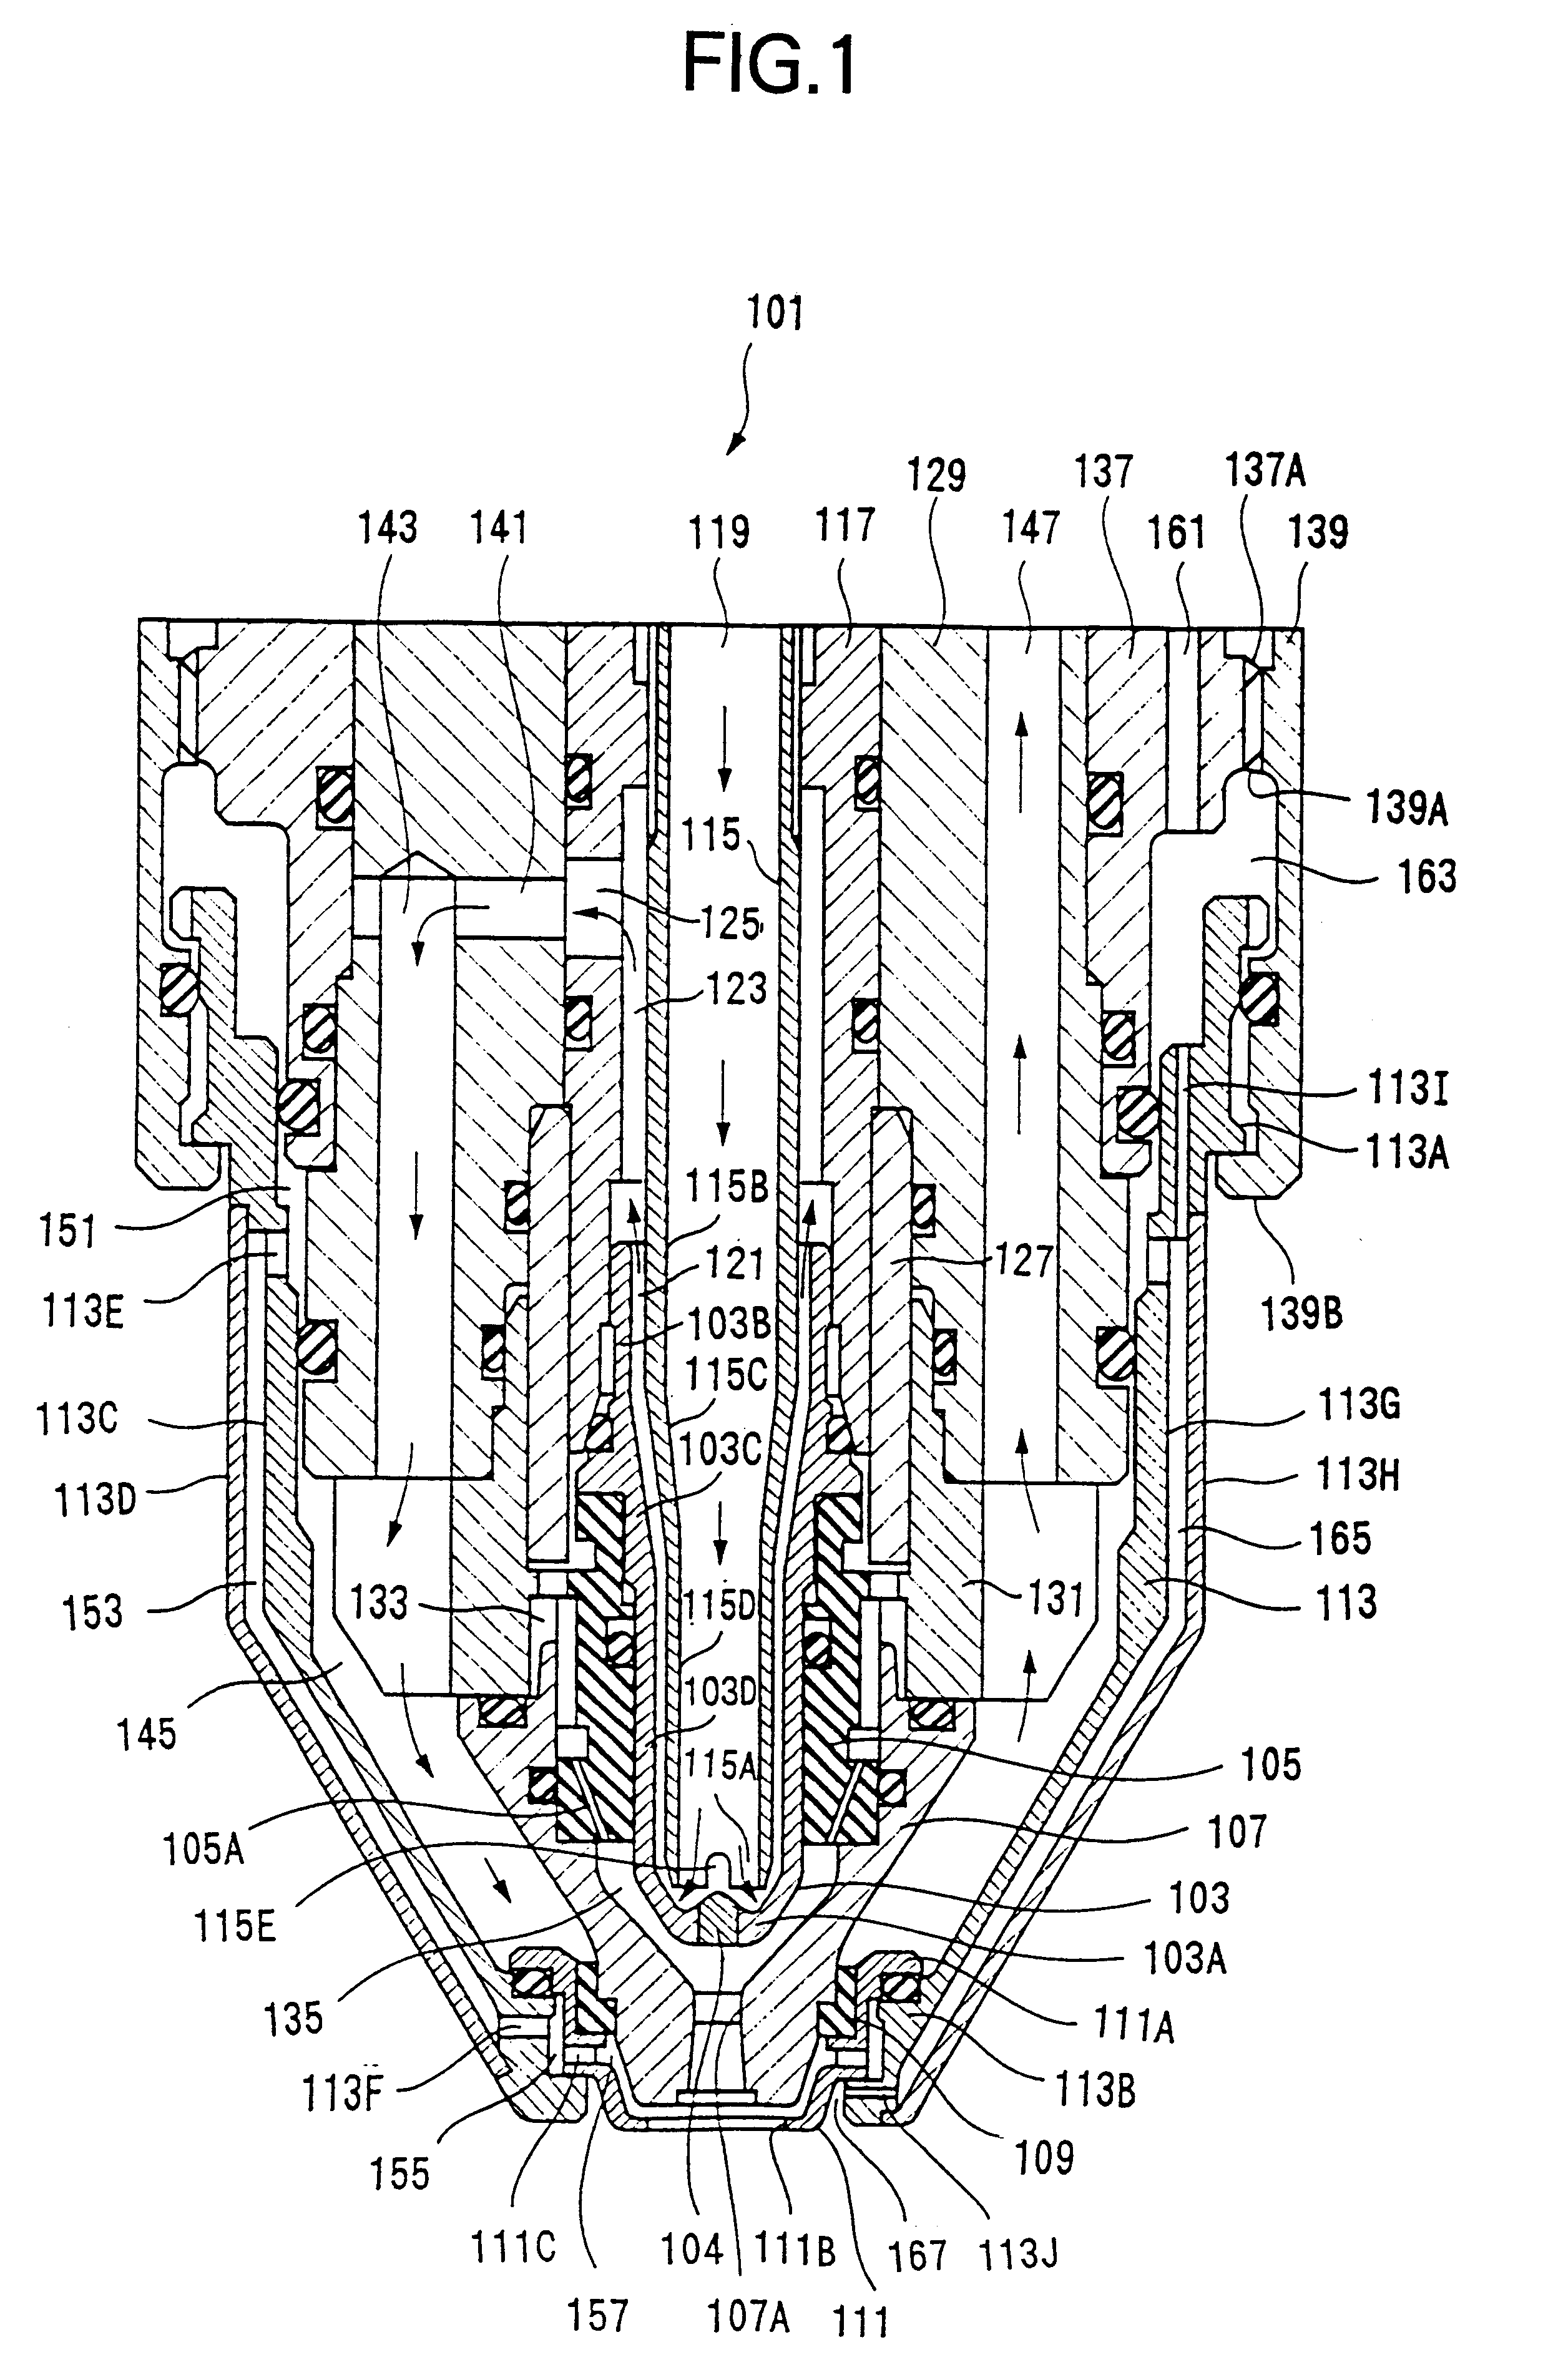 Plasma processing device, plasma torch and method for replacing components of same